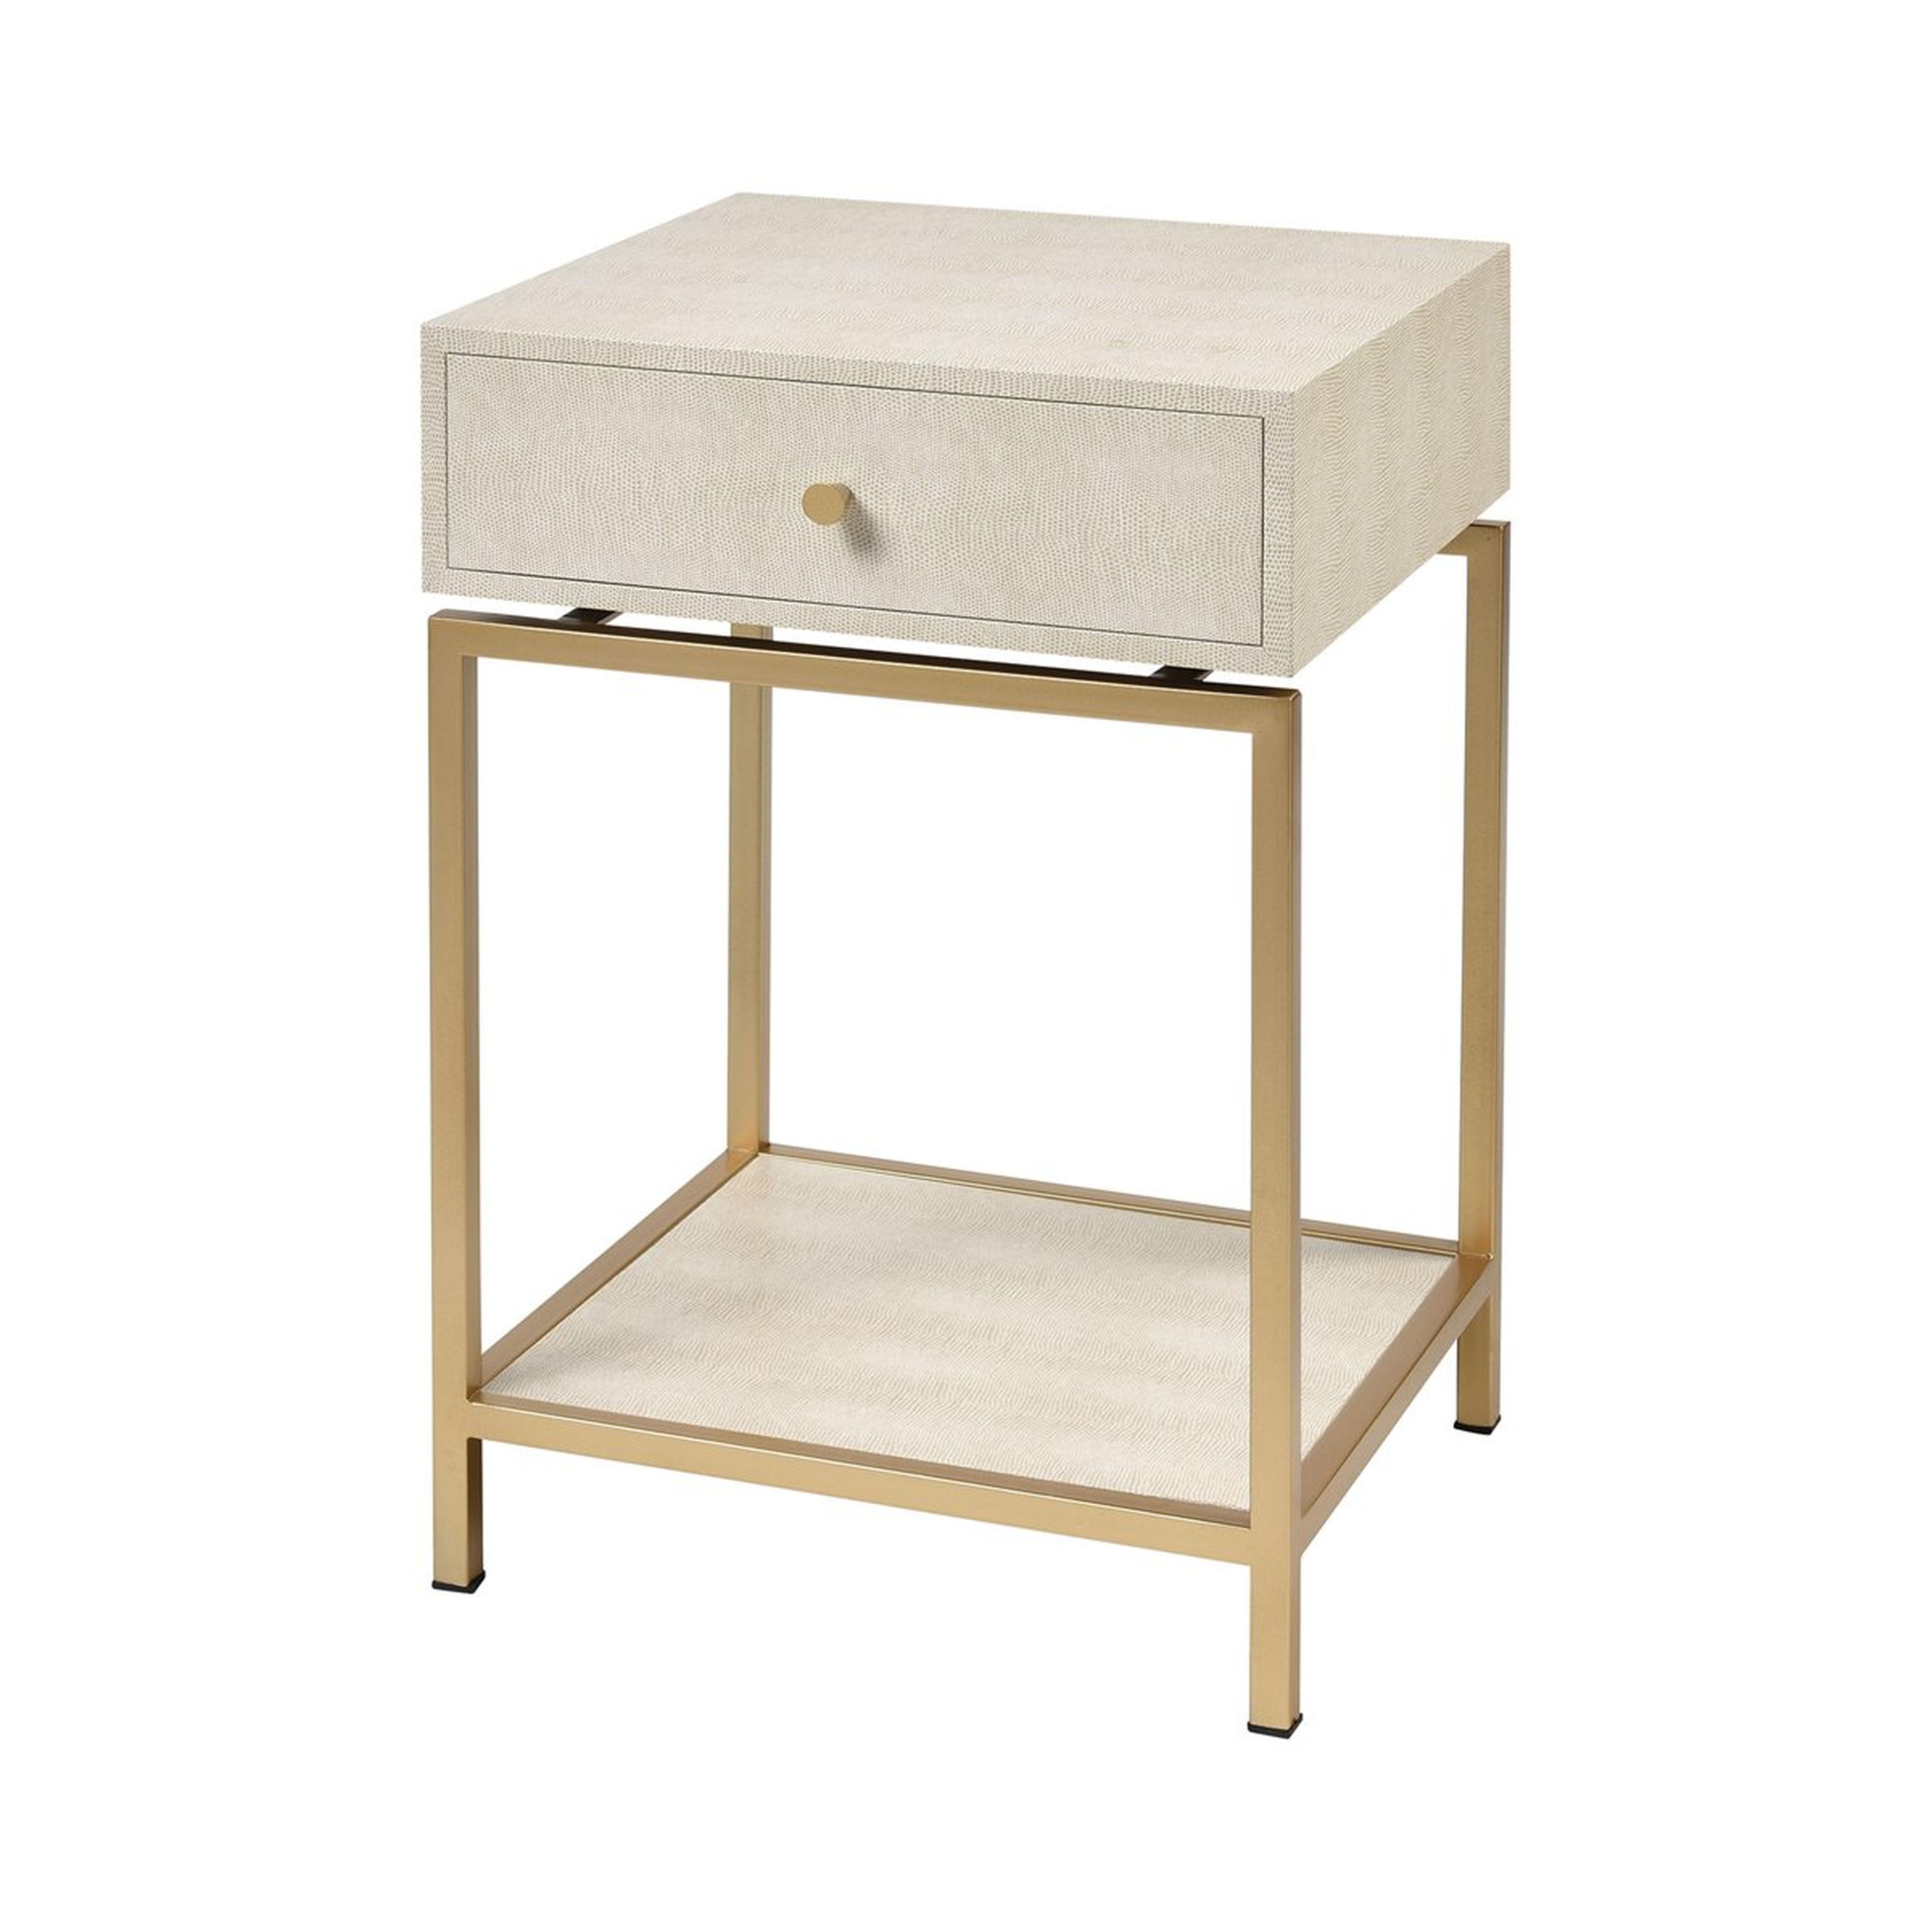 CLANCY ACCENT TABLE IN CREAM - Elk Home